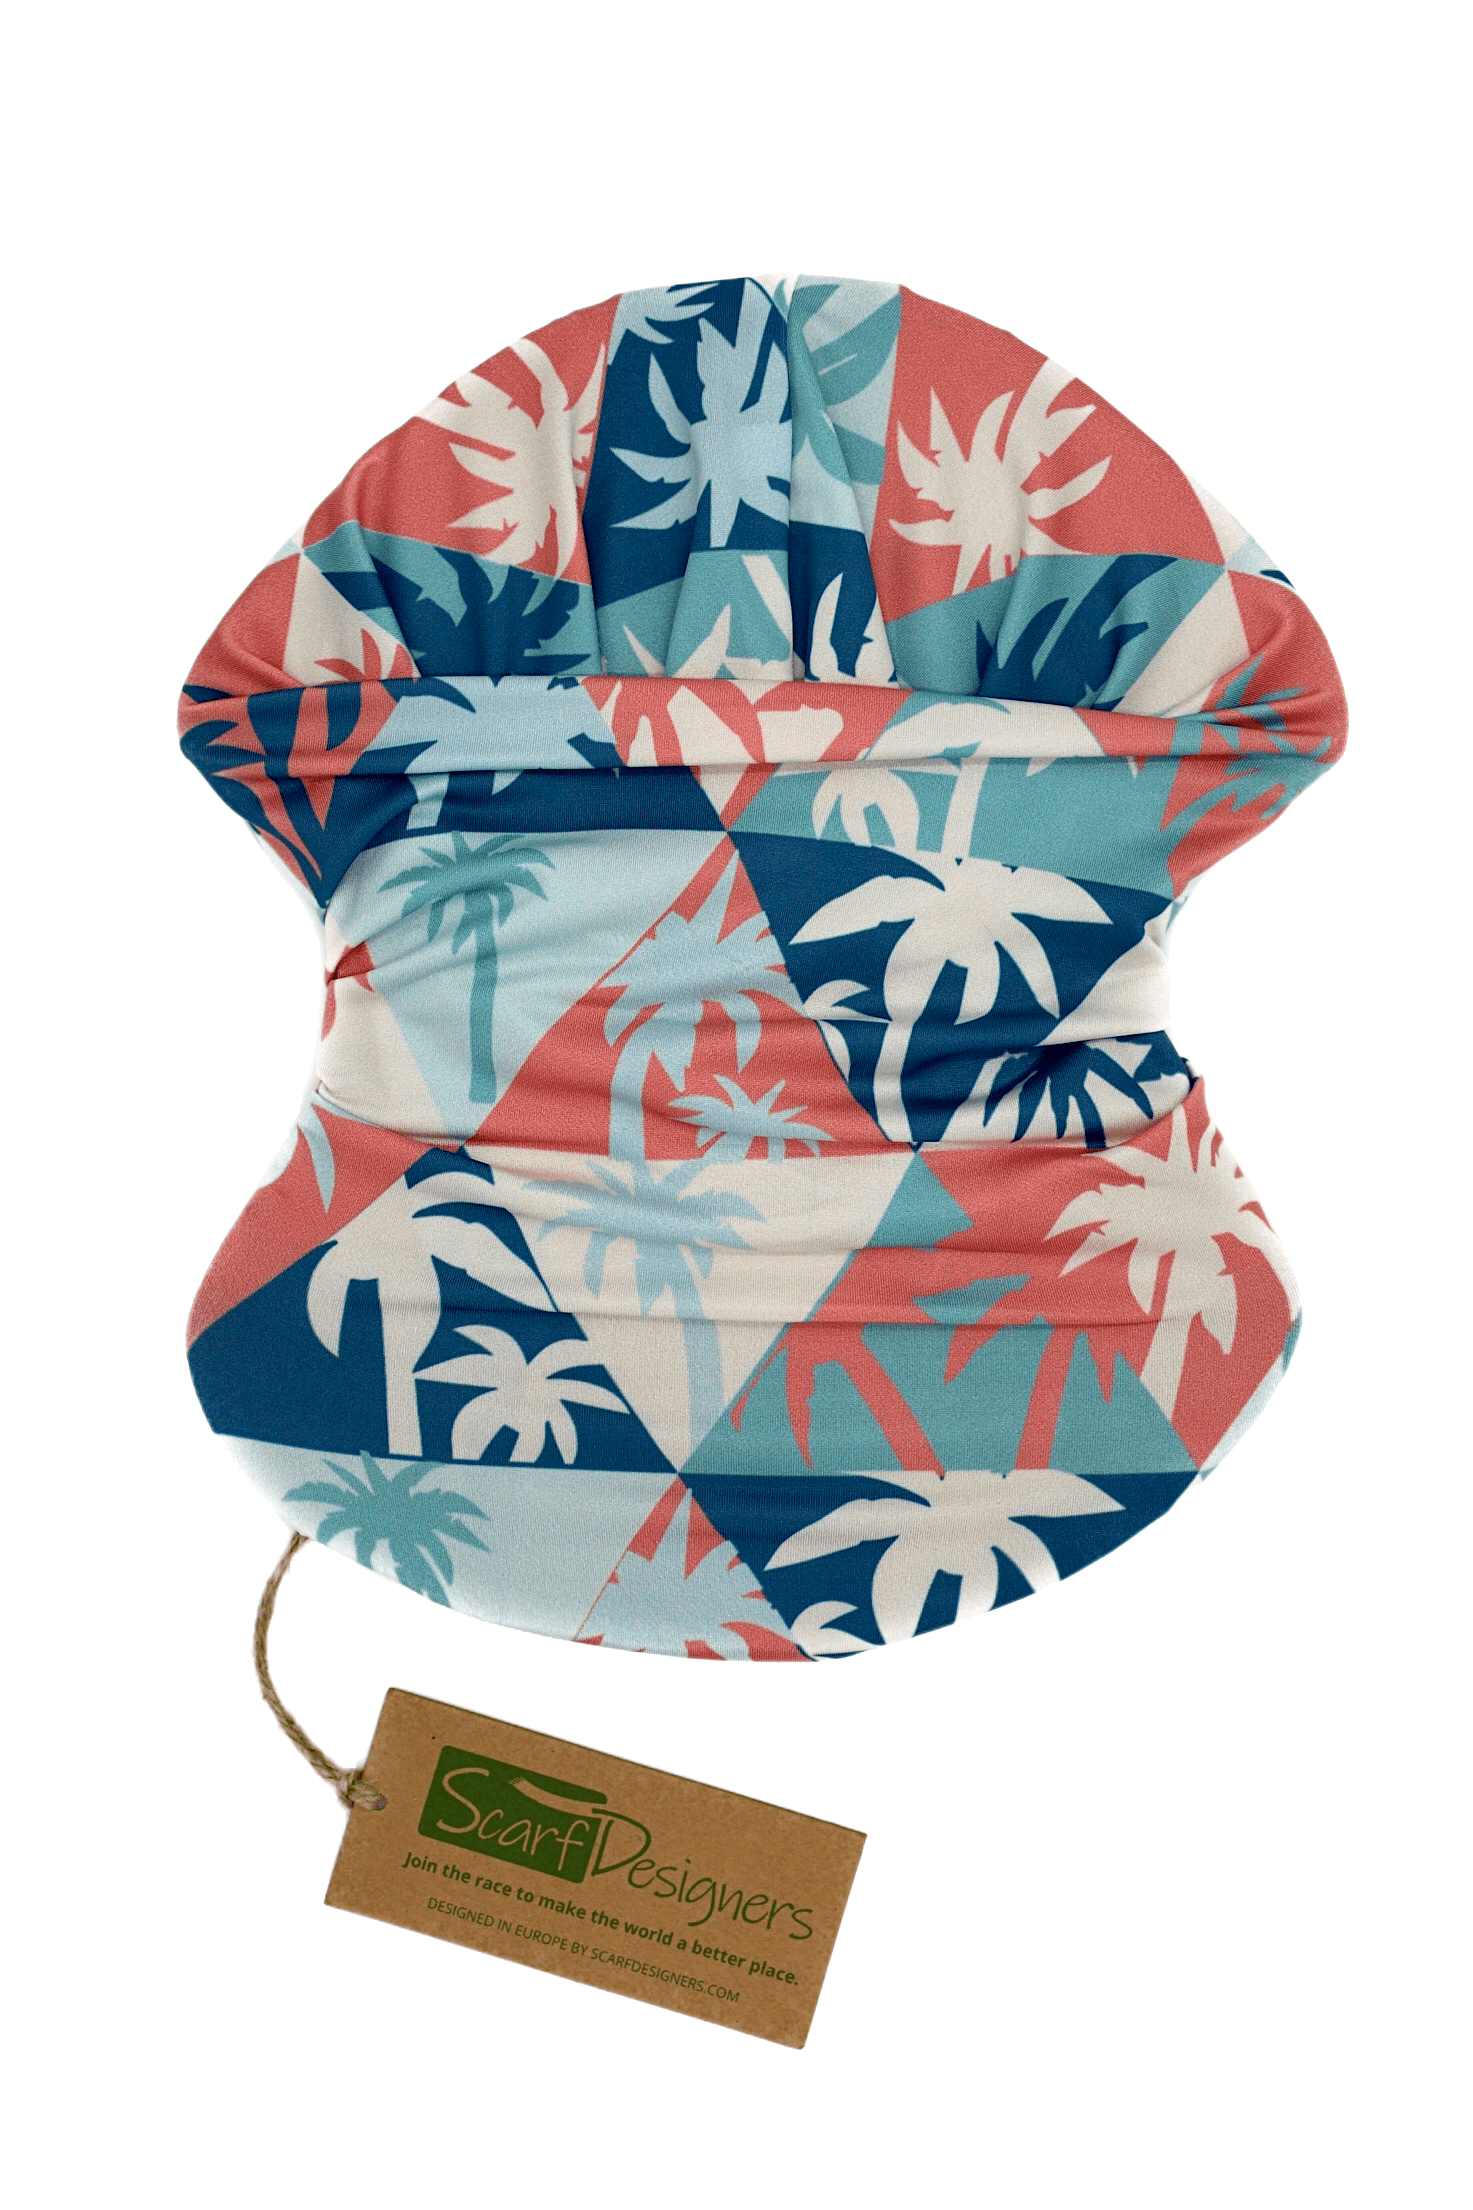 This is a unisex, multifunctional and sustainable bandana with palm print. It is made from recycled polyester which is breathable, durable, soft to touch, easy to care and fast drying material. It makes it perfectly suitable for all kinds of sports like biking, hiking, jogging or skiing. This is a versatile bandana that can be used as a scarf, face mask, bandana or headband and it is also known as tube scarf, neck gaiter or face mask. It is a vegan product certified by PETA.